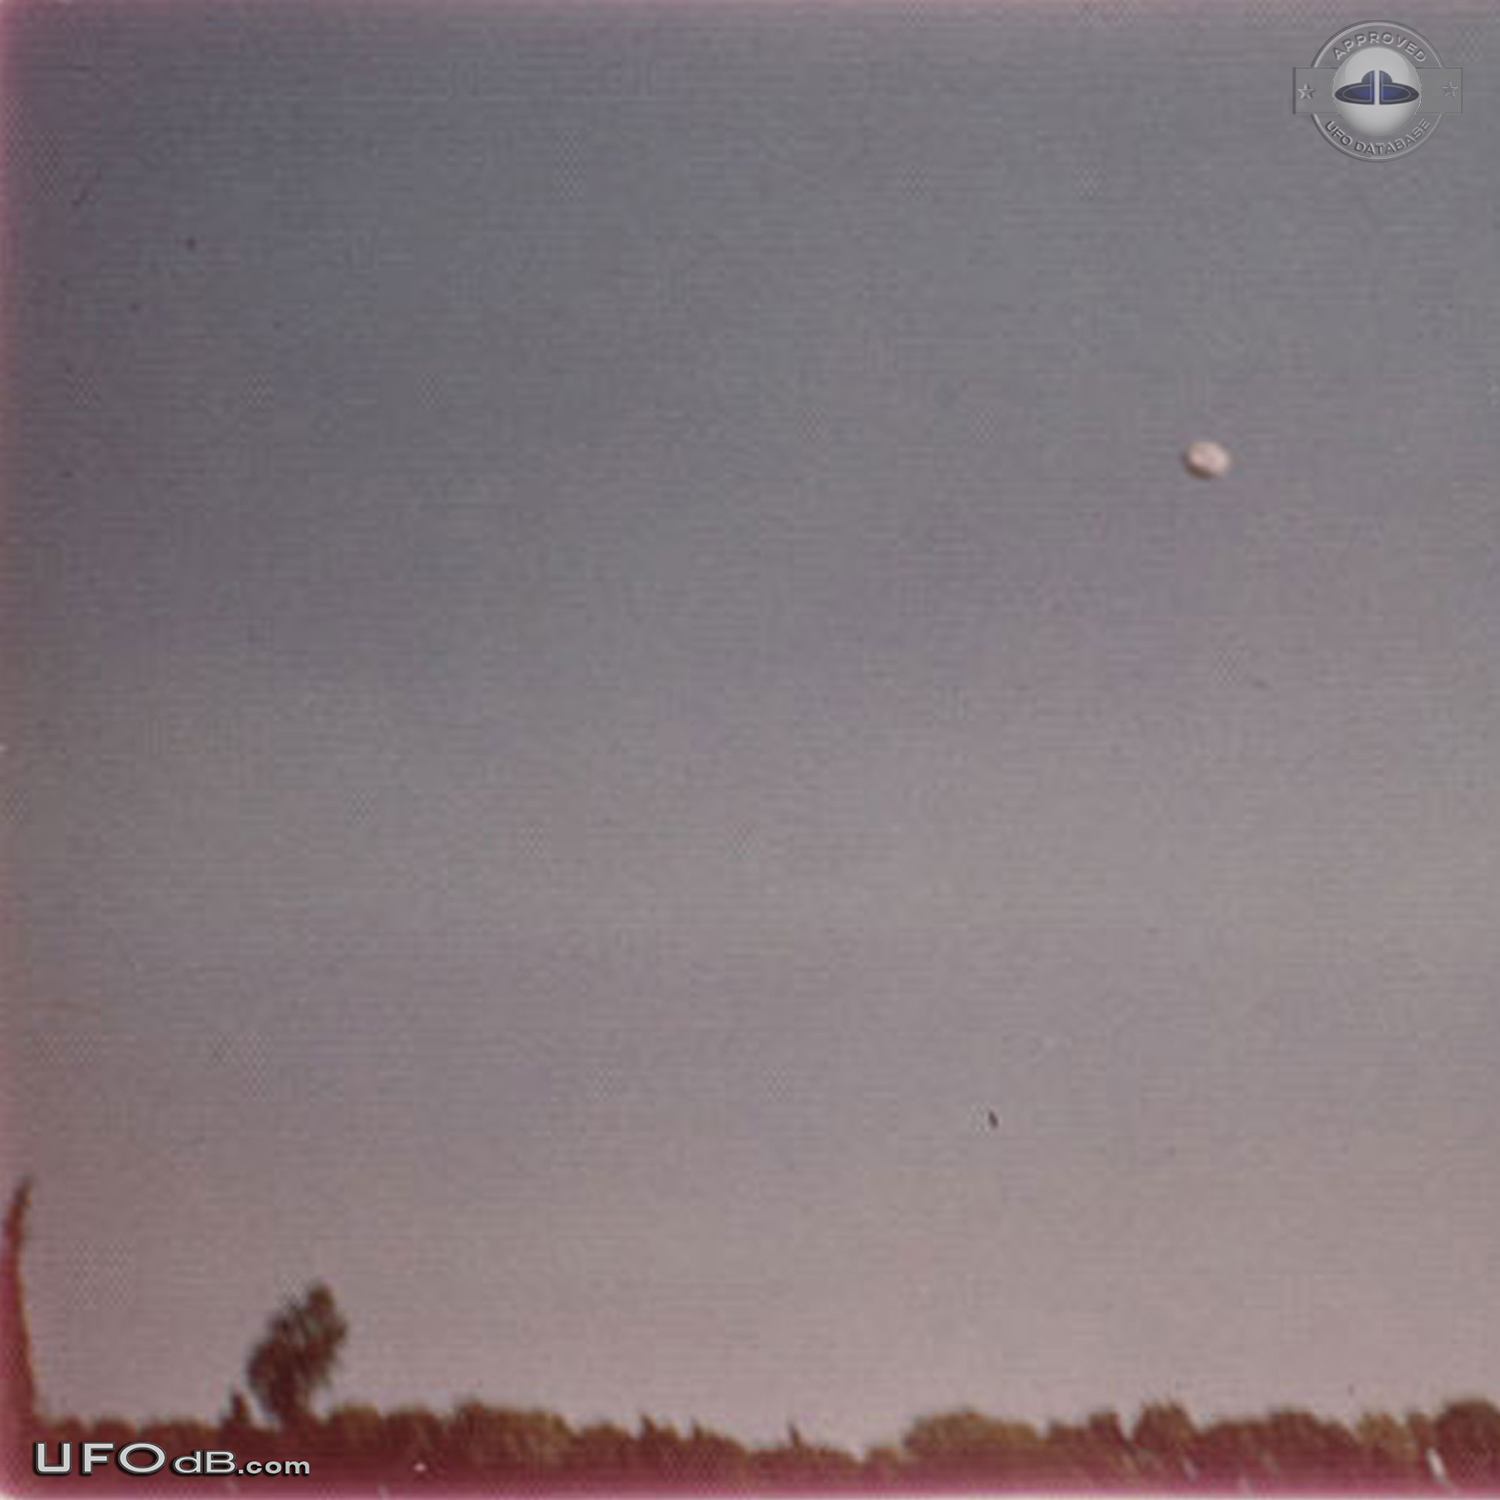 Famous Florida Uruguay UFO pictures sequence taken July 1977 UFO Picture #463-5